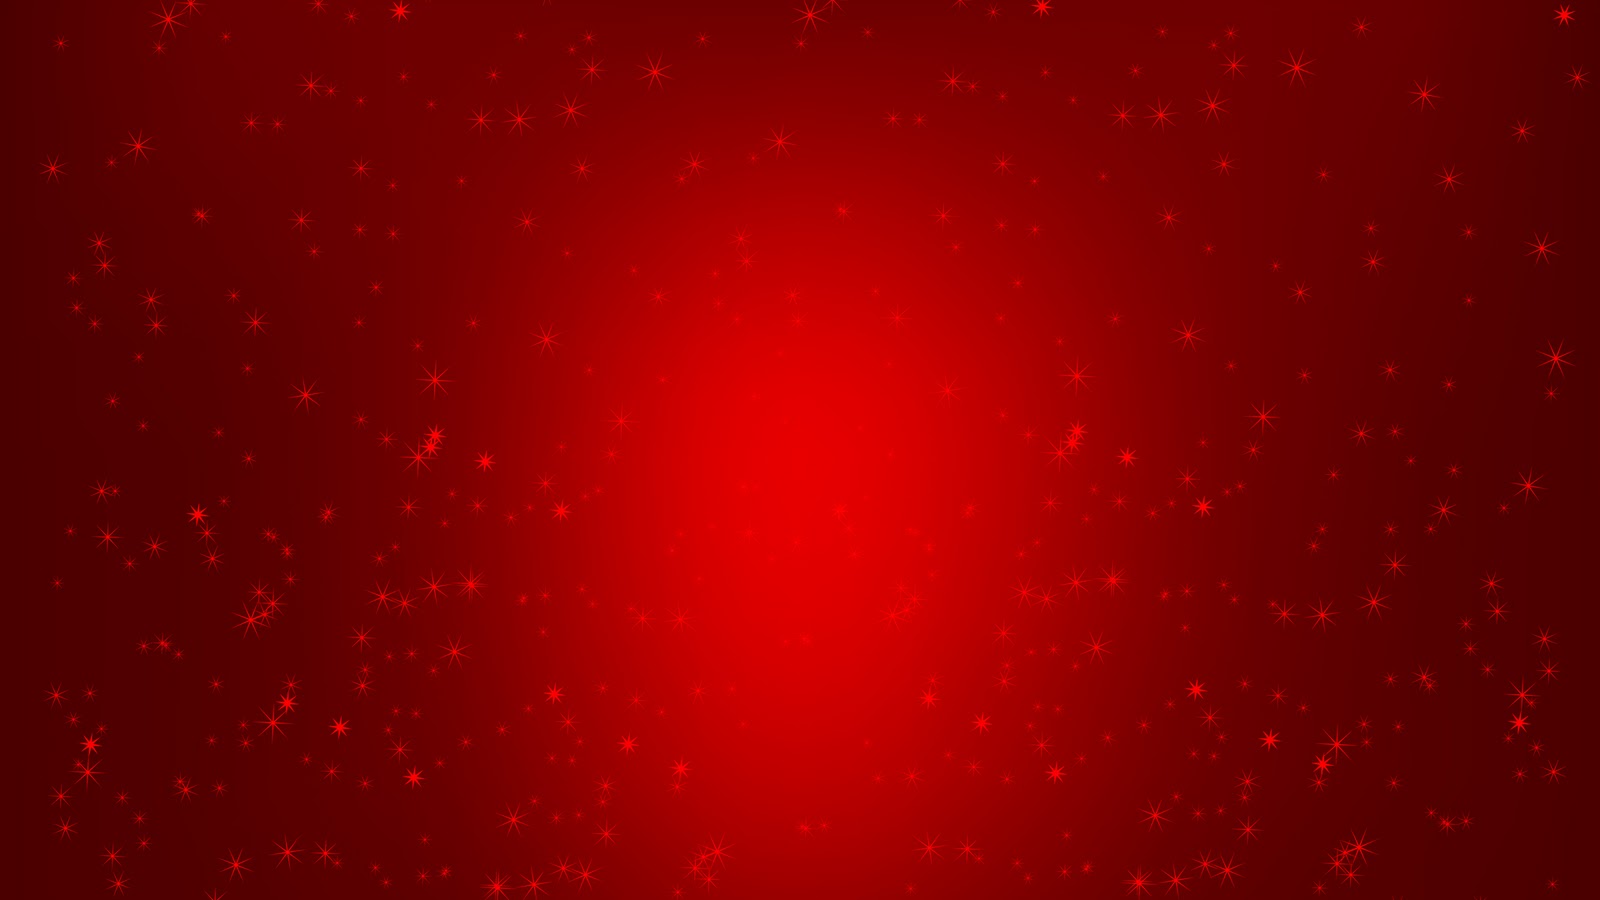 vector free download red - photo #50